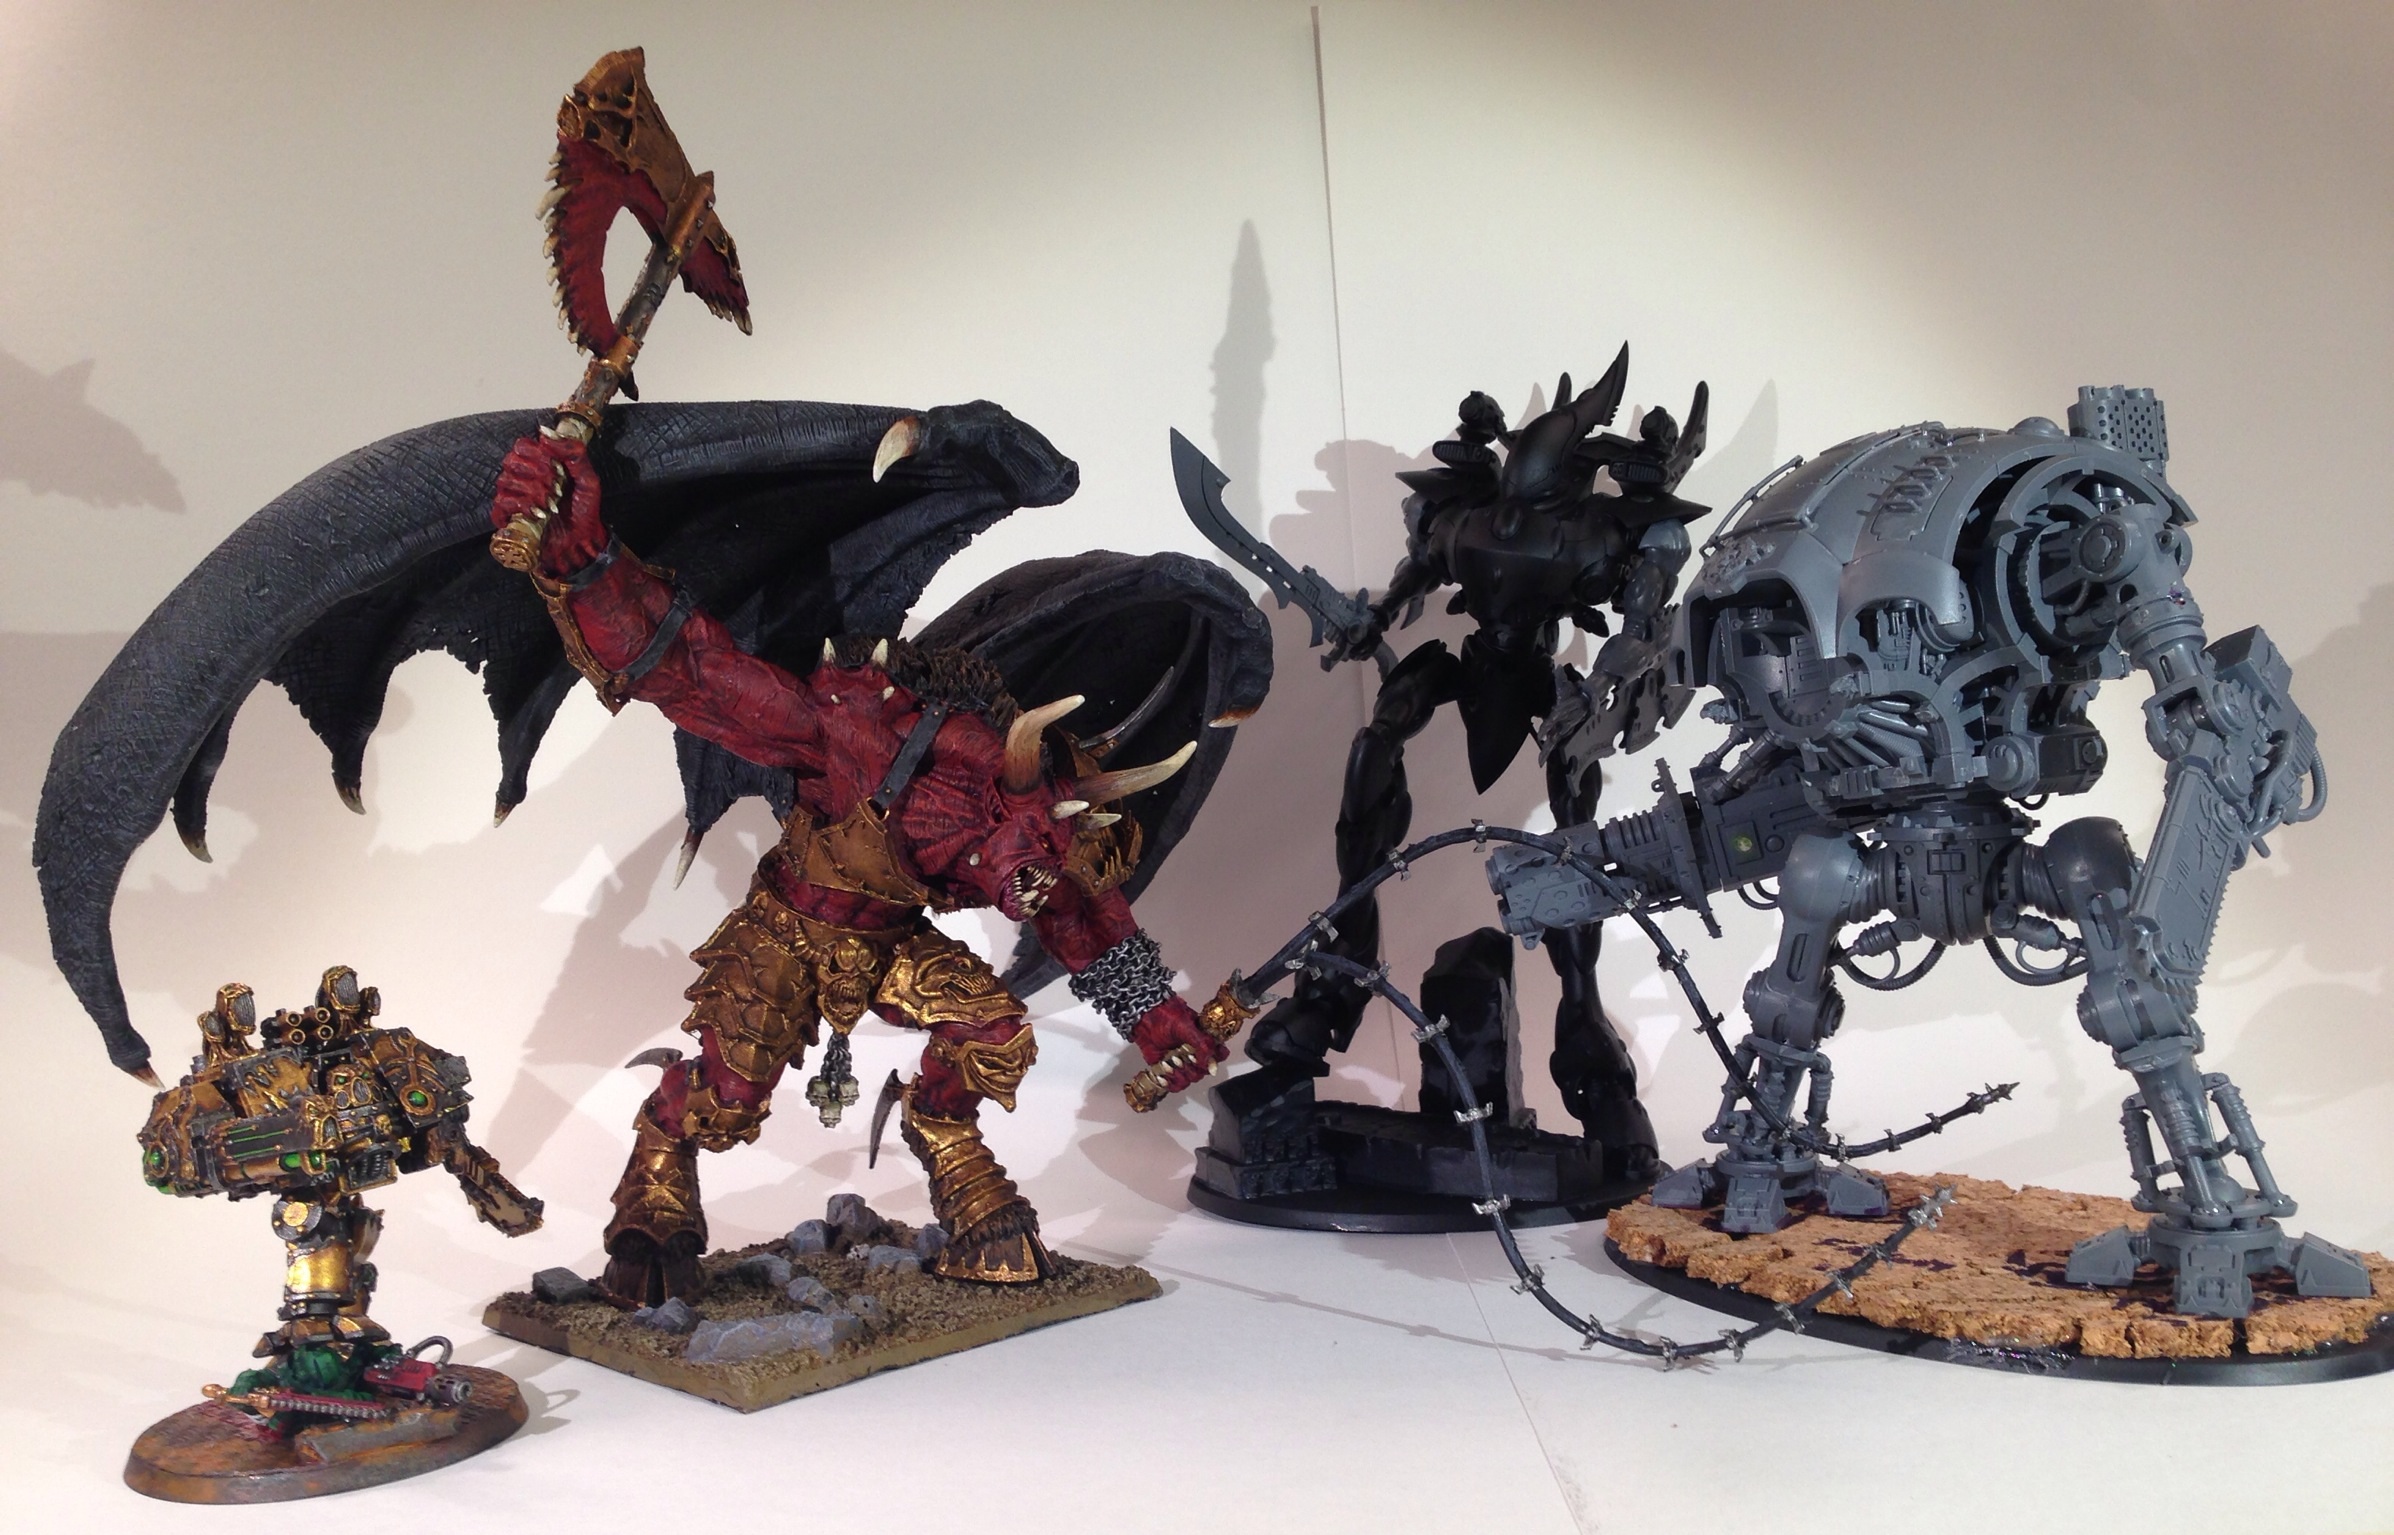 For a sense of scale, from left to right: Sonic Dreadnought, An’ggrath, Wra...